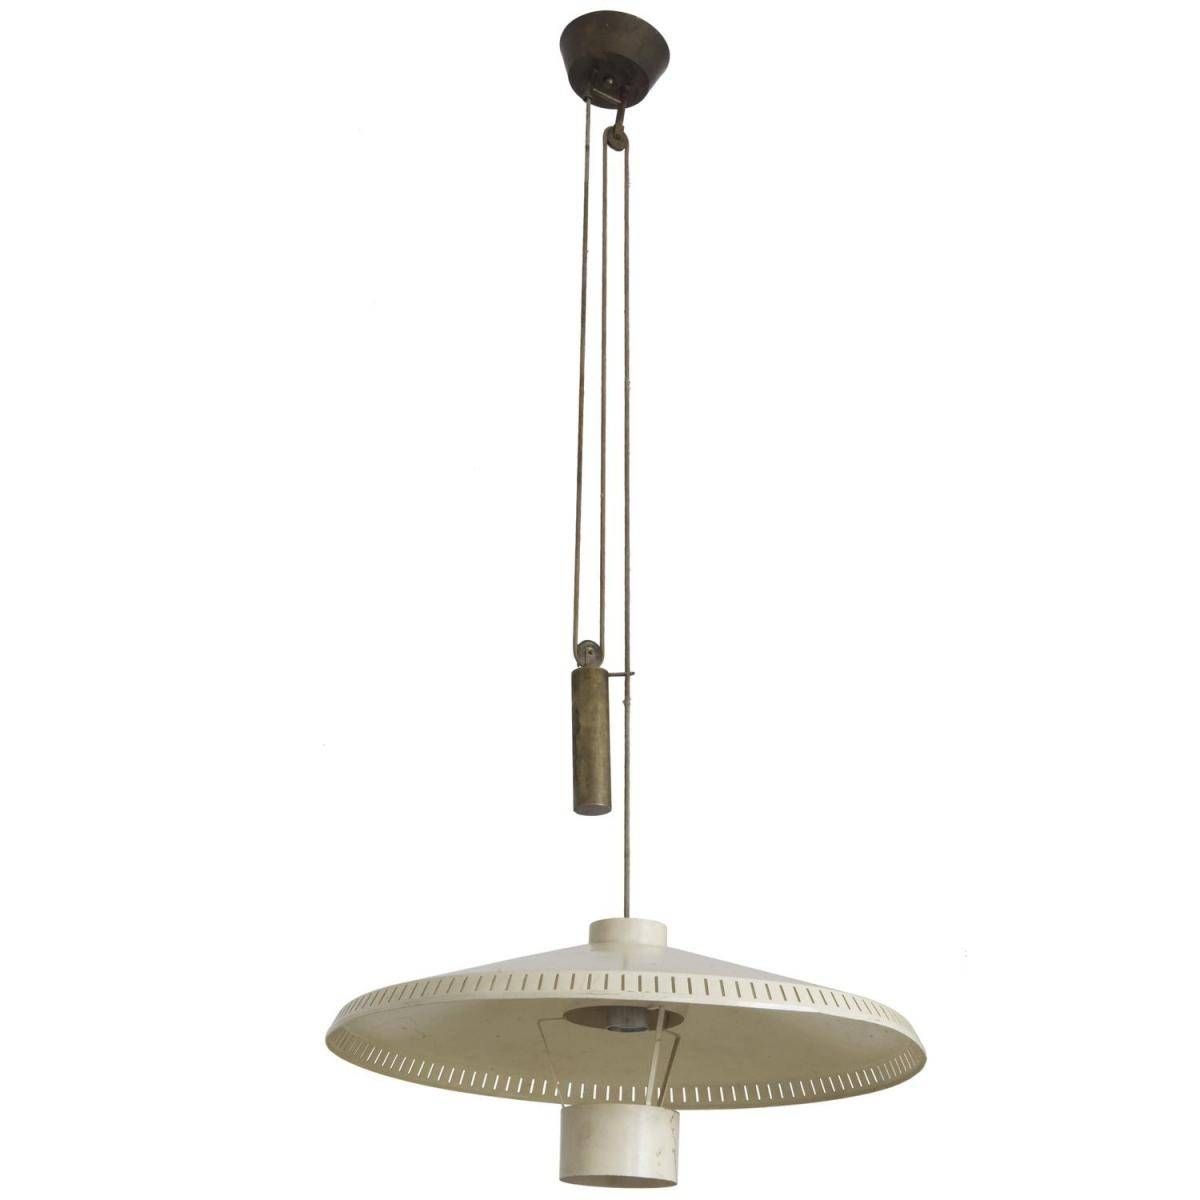 Italian Counterweight Hanging Lamp From Stilnovo, 1950s For Sale Throughout Counterweight Pendant Lights (View 10 of 15)